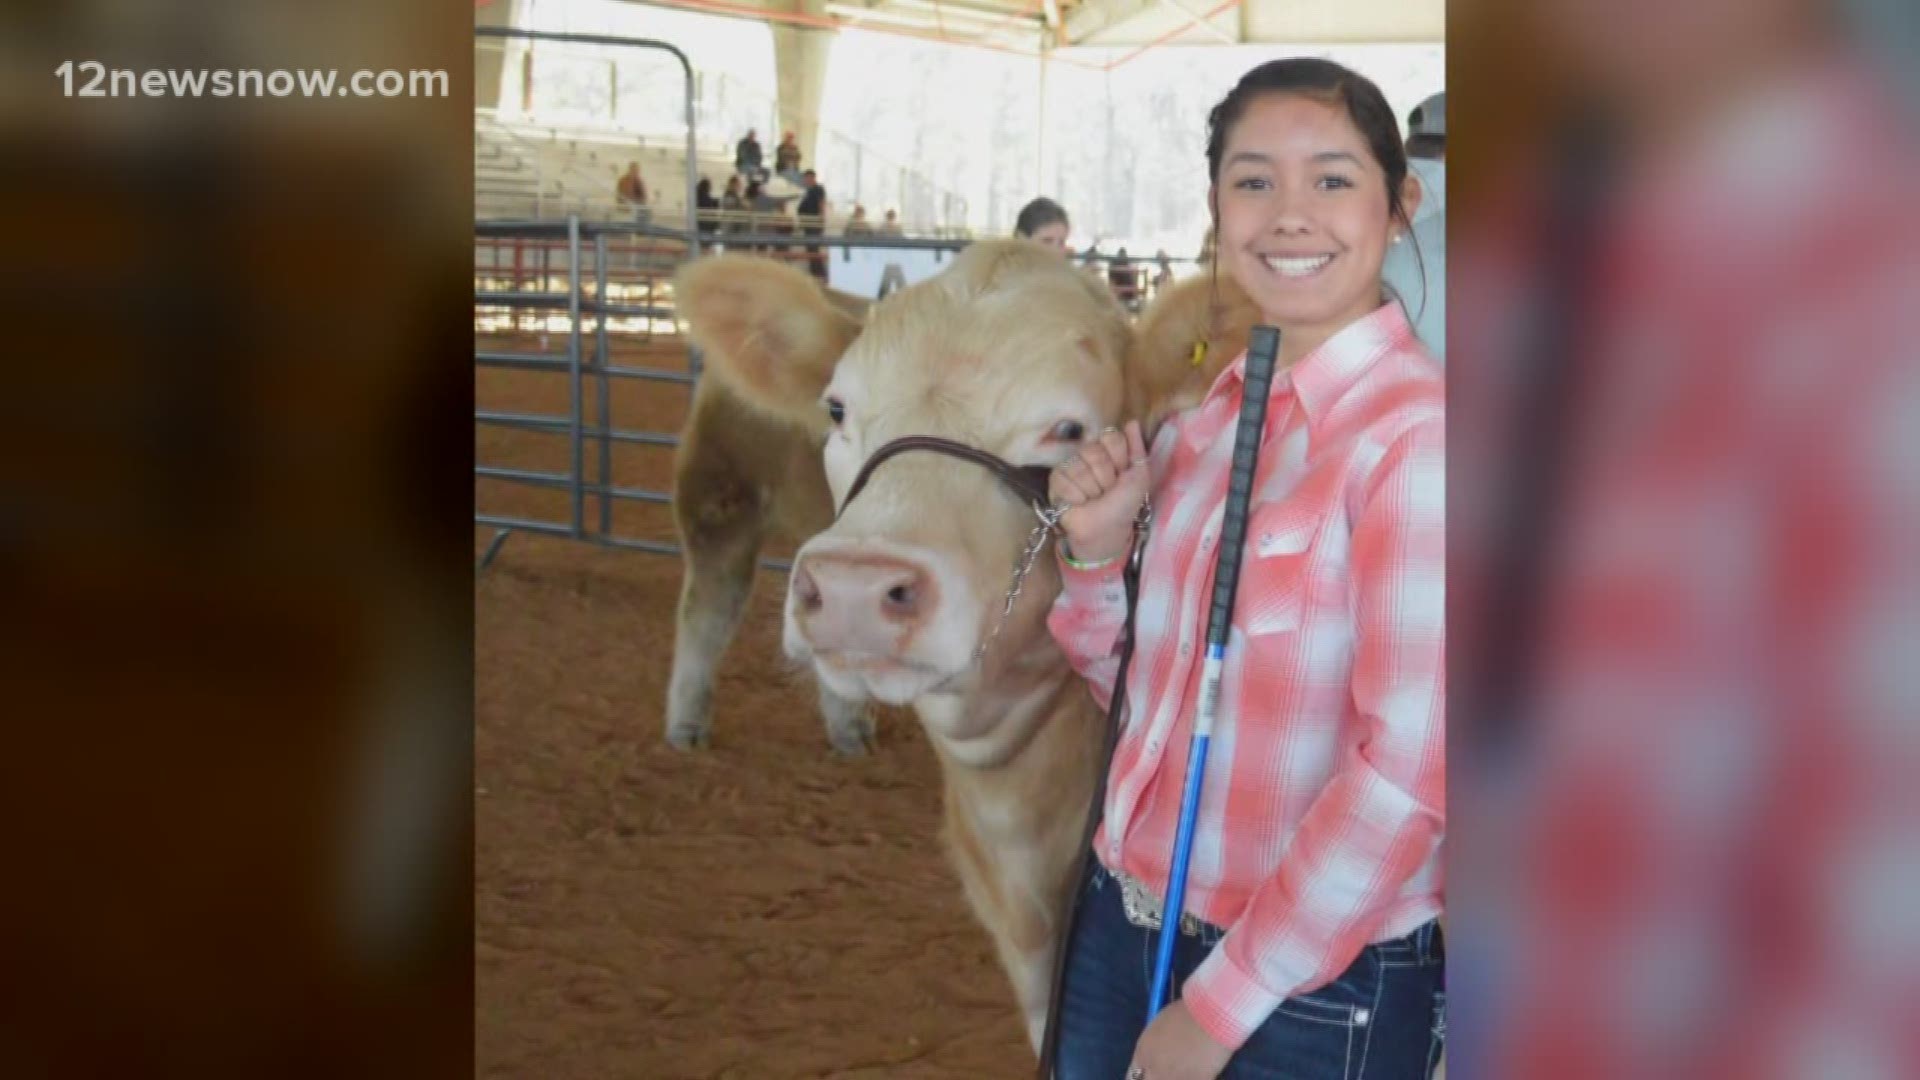 Students lost out on the money they would have made by participating in the livestock shows